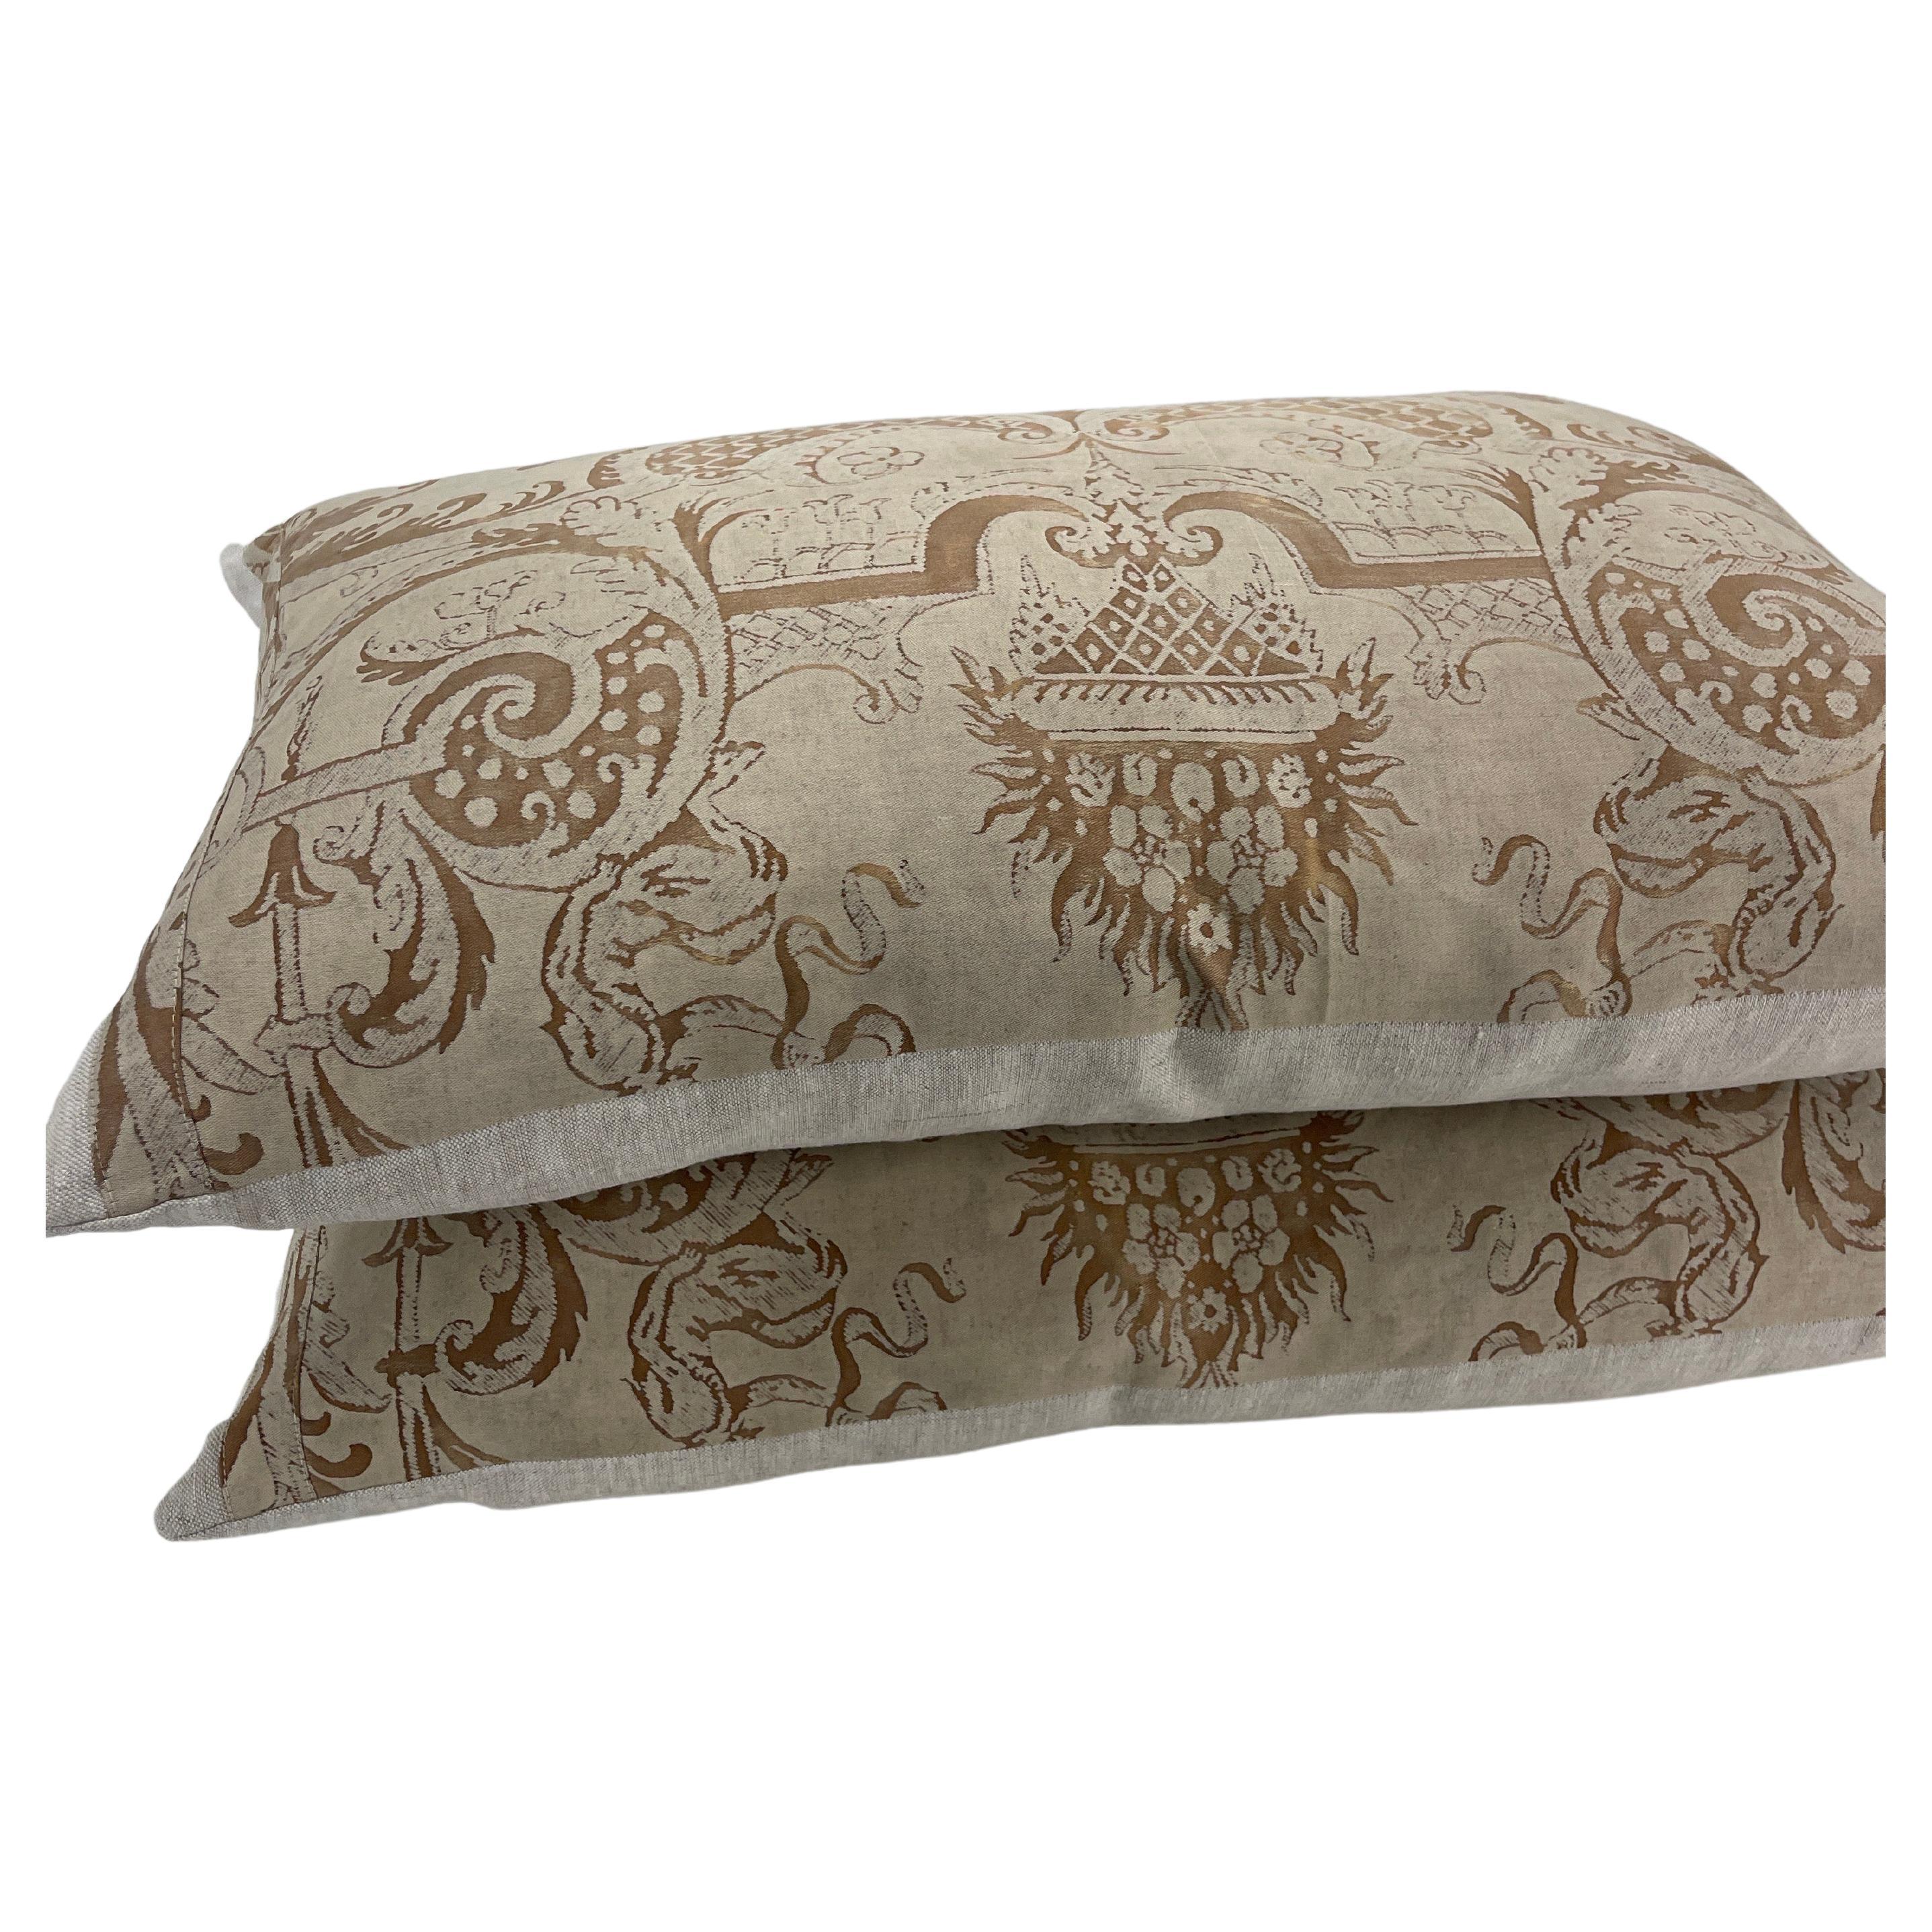 Fortuny Fabric pair of textile pillows in Royal Gold pattern, Italy

Collected and coveted Fortuny fabric on the front and flax linen on the back. Feather down inserts are included as well as hidden zipper enclosures. 
Fortuny Fabrics is